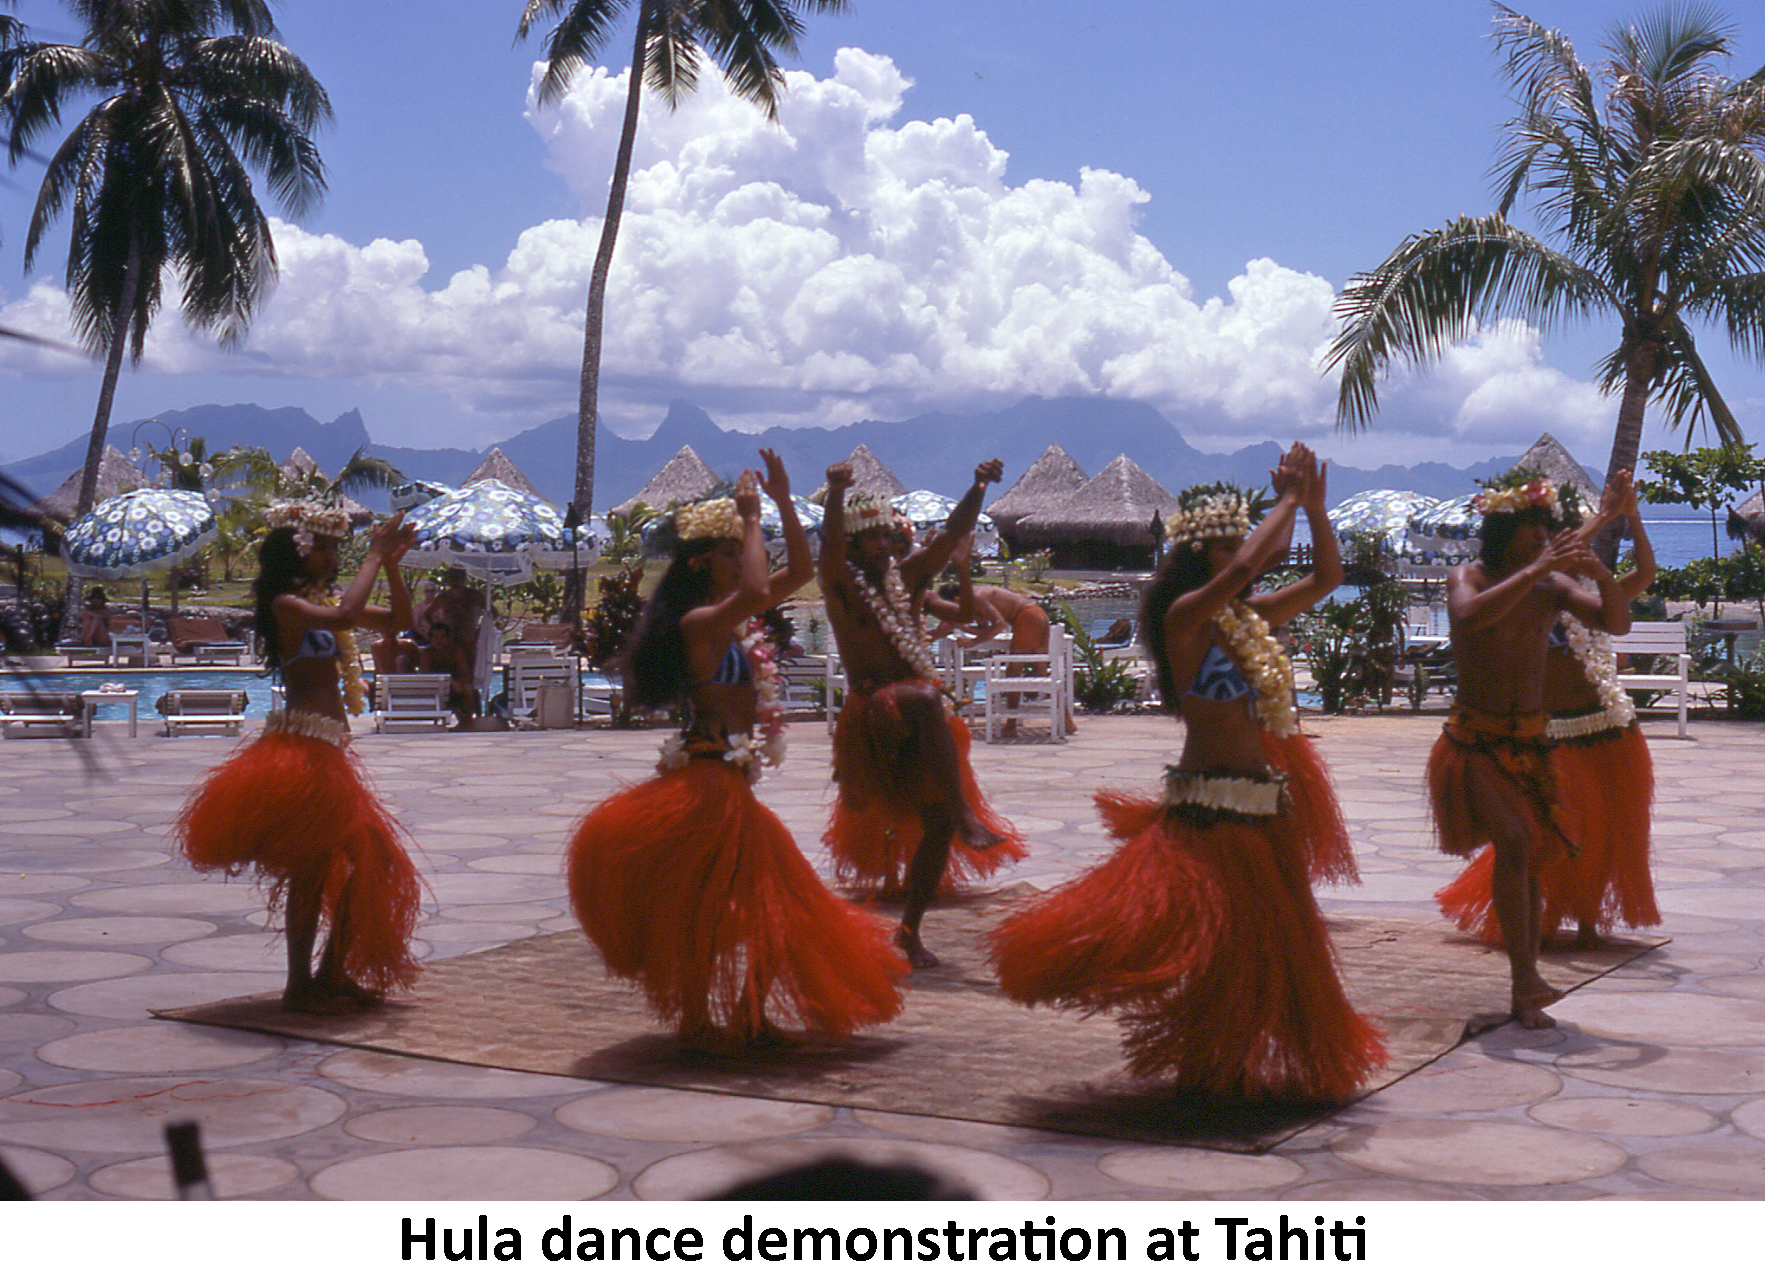 Six Tahitian women and two men in red skirts demonstrate a hula dance